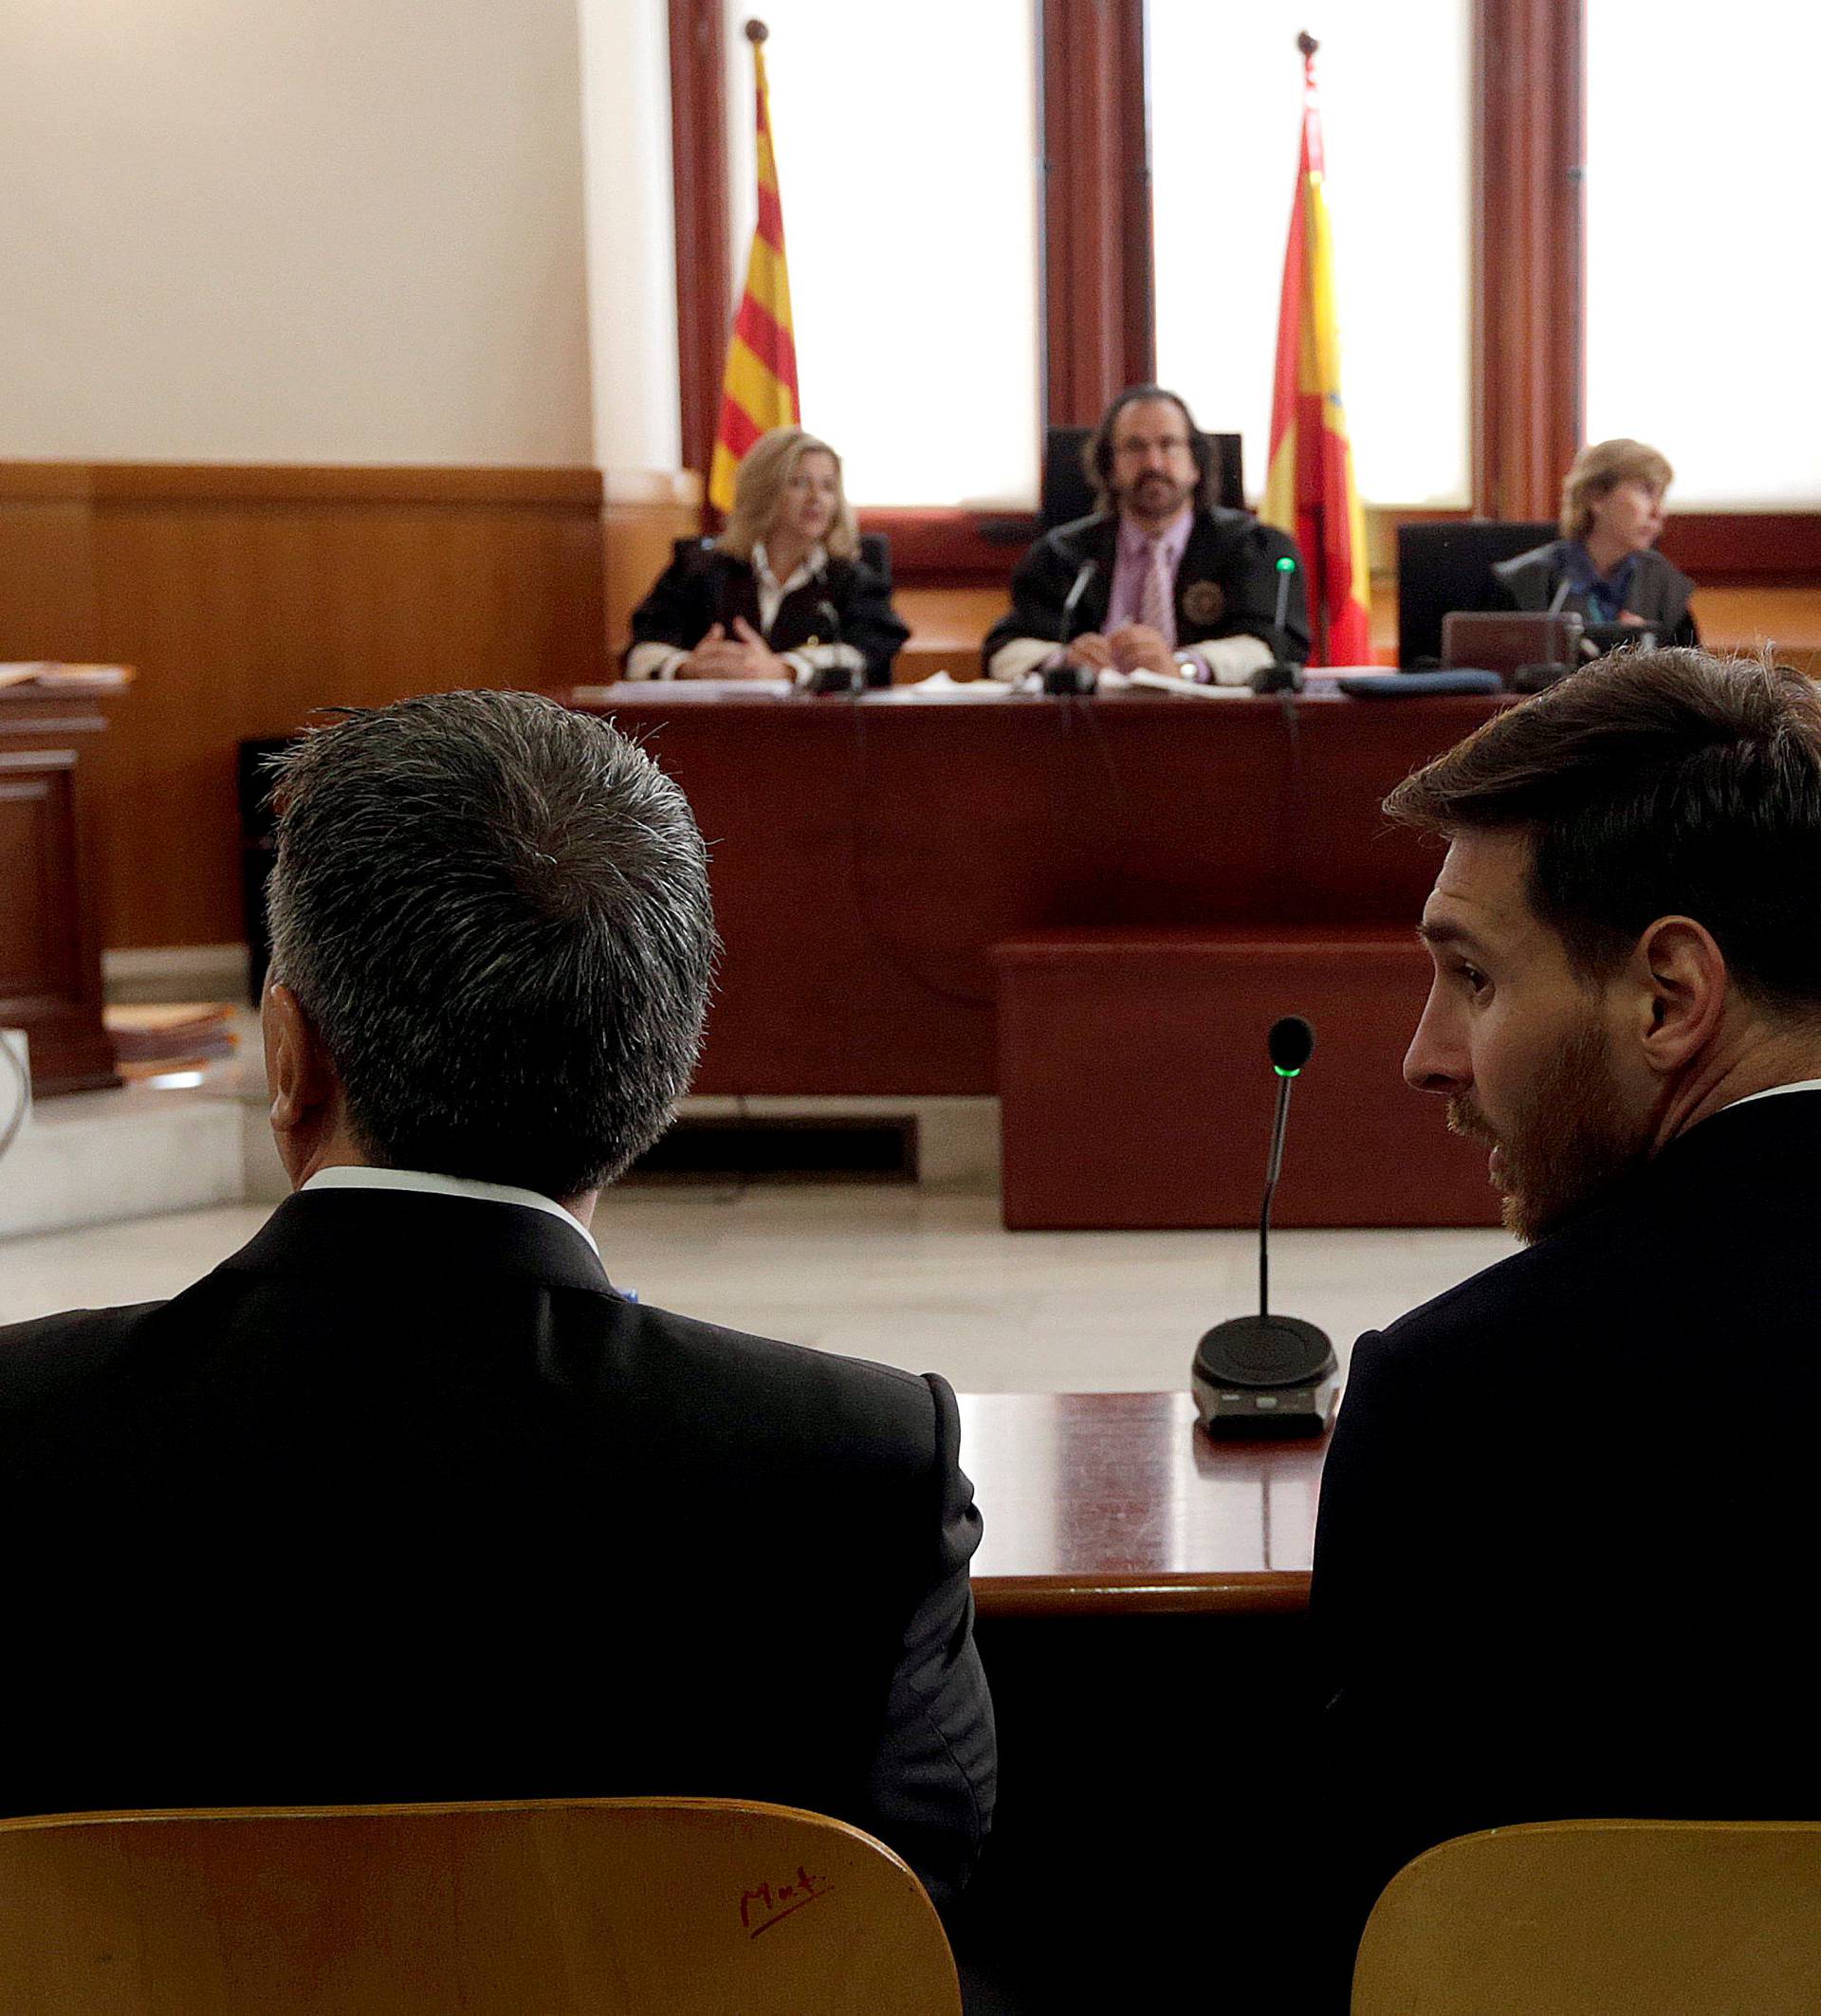 Barcelona's Argentine soccer player Lionel Messi sits in court with his father Jorge Horacio Messi during their trial for tax fraud in Barcelona